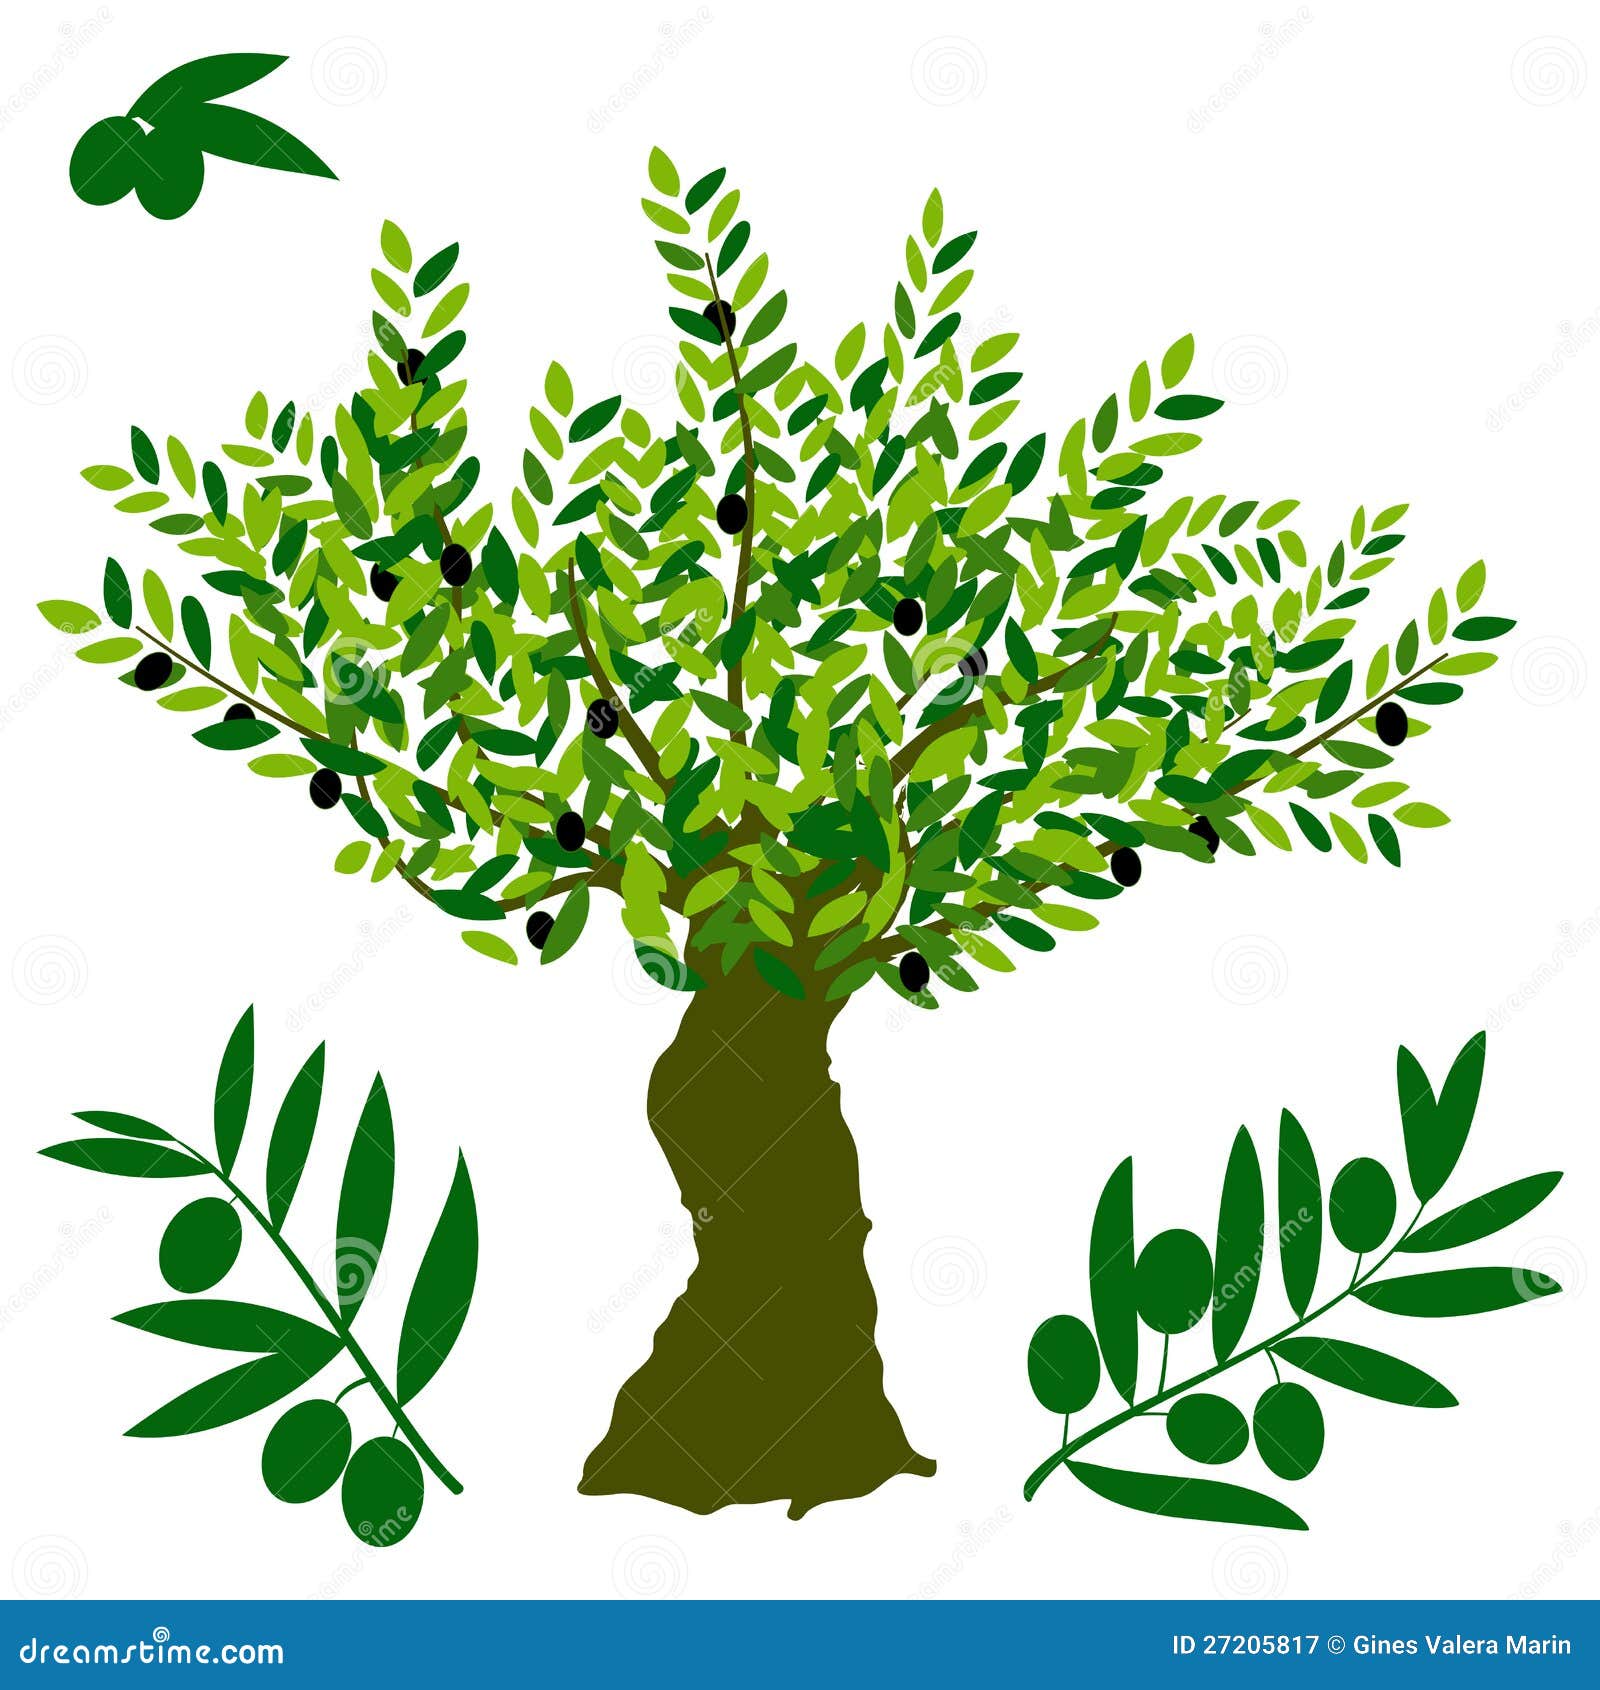 olive tree clip art images - photo #9